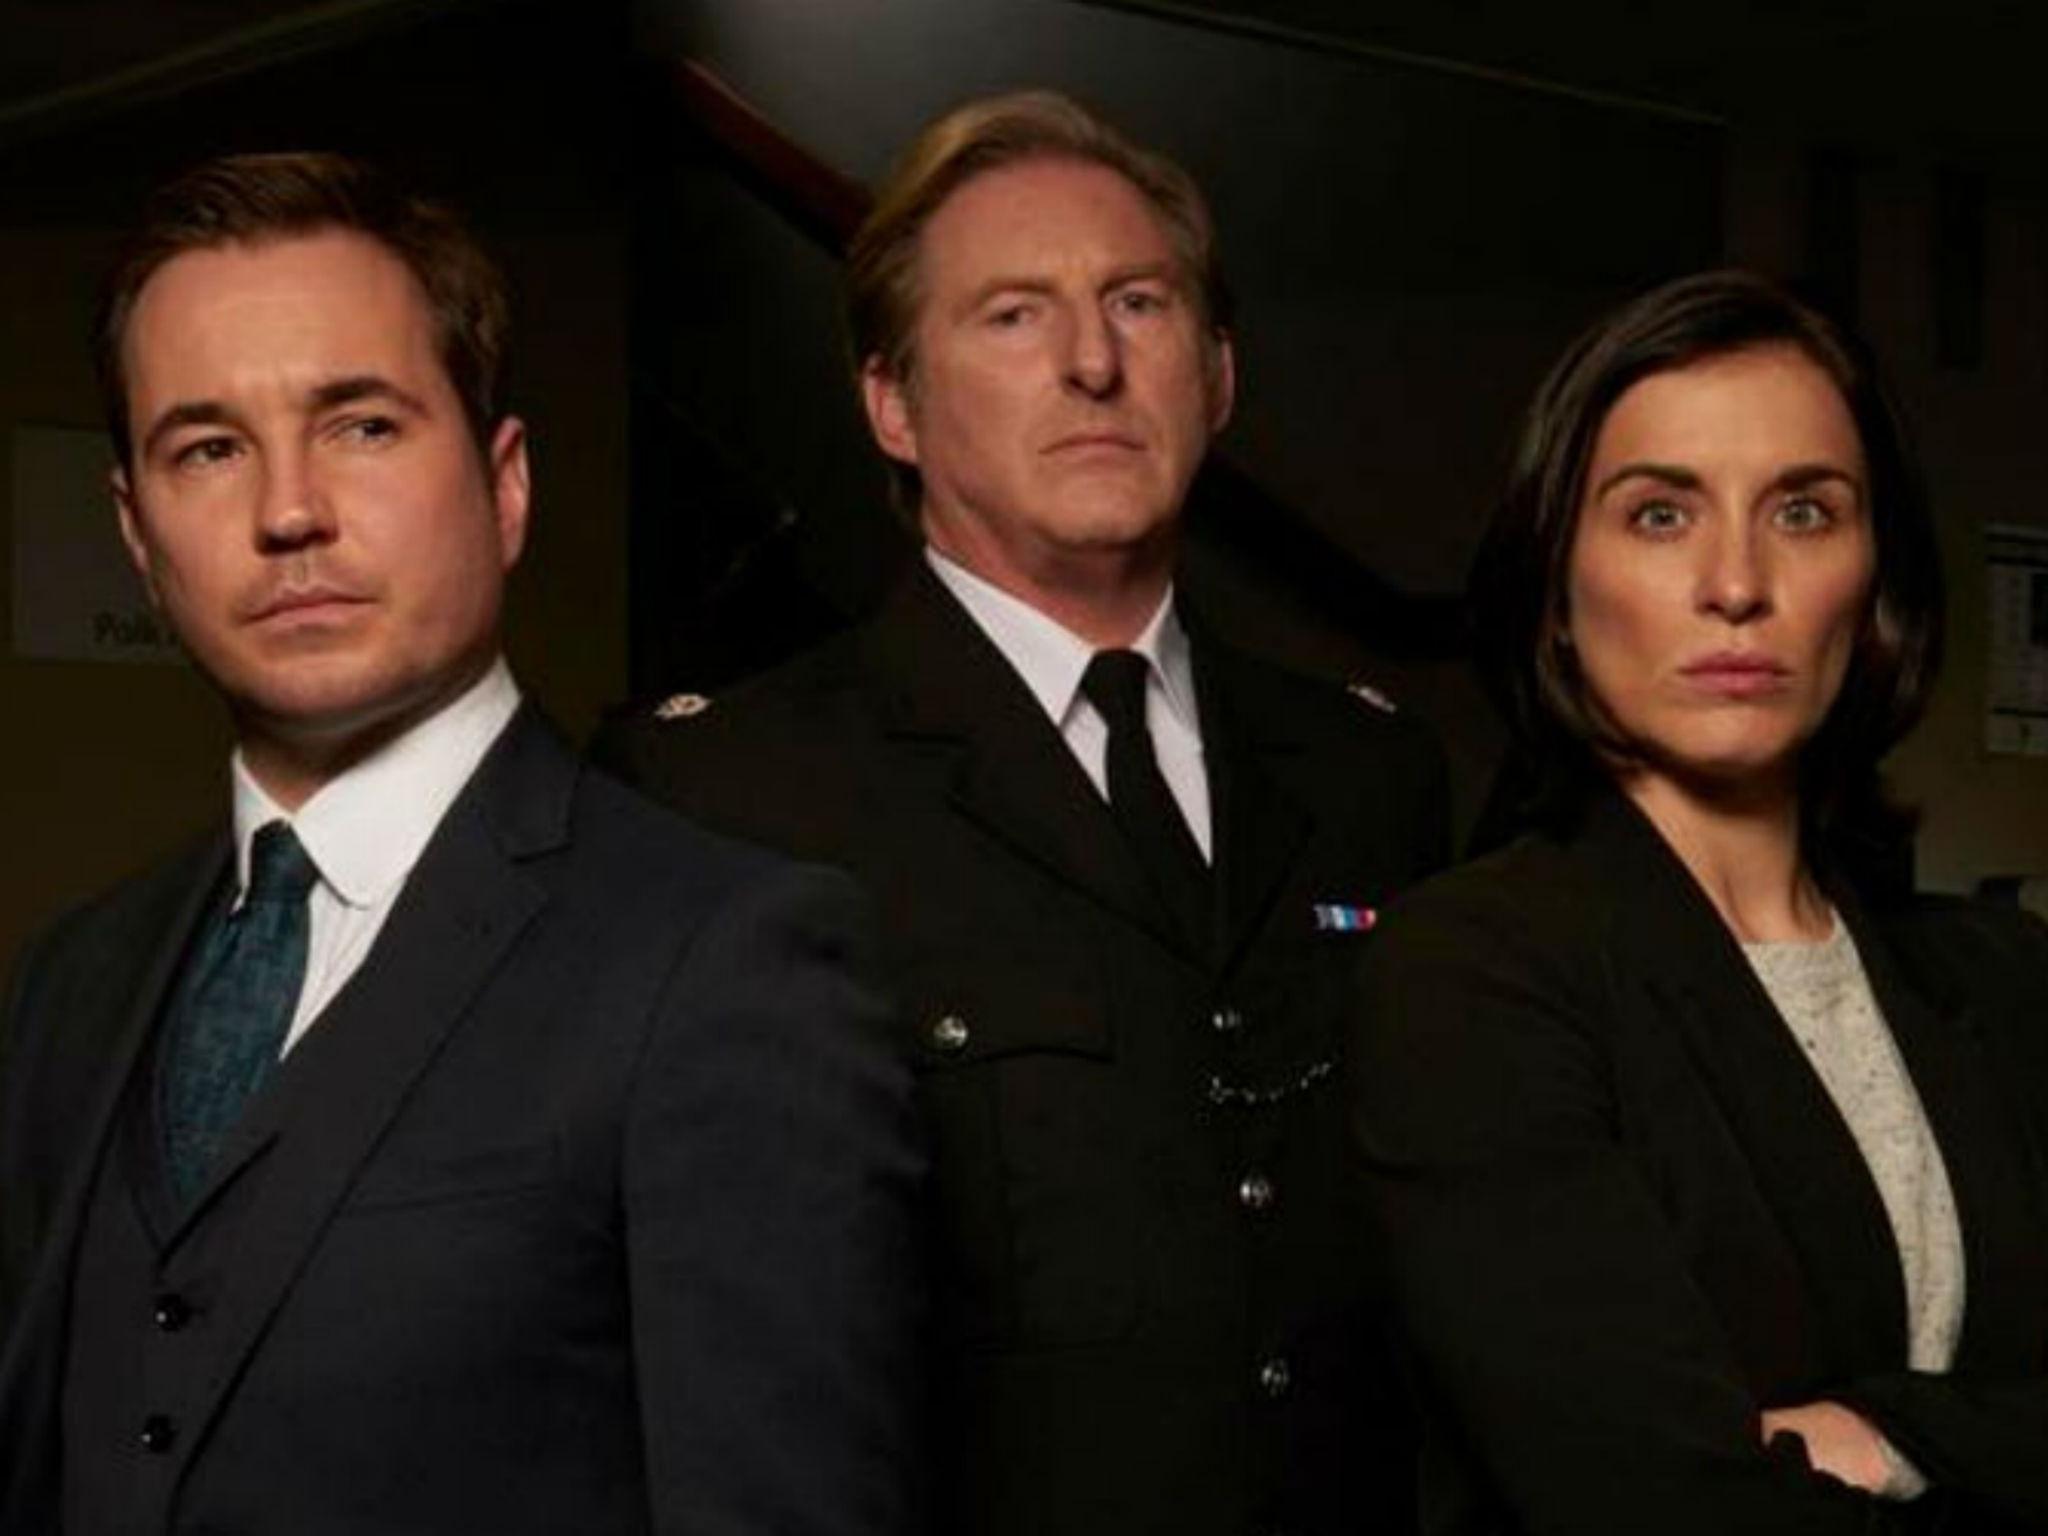 The 20 greatest TV cop shows of all time, from Line of Duty to